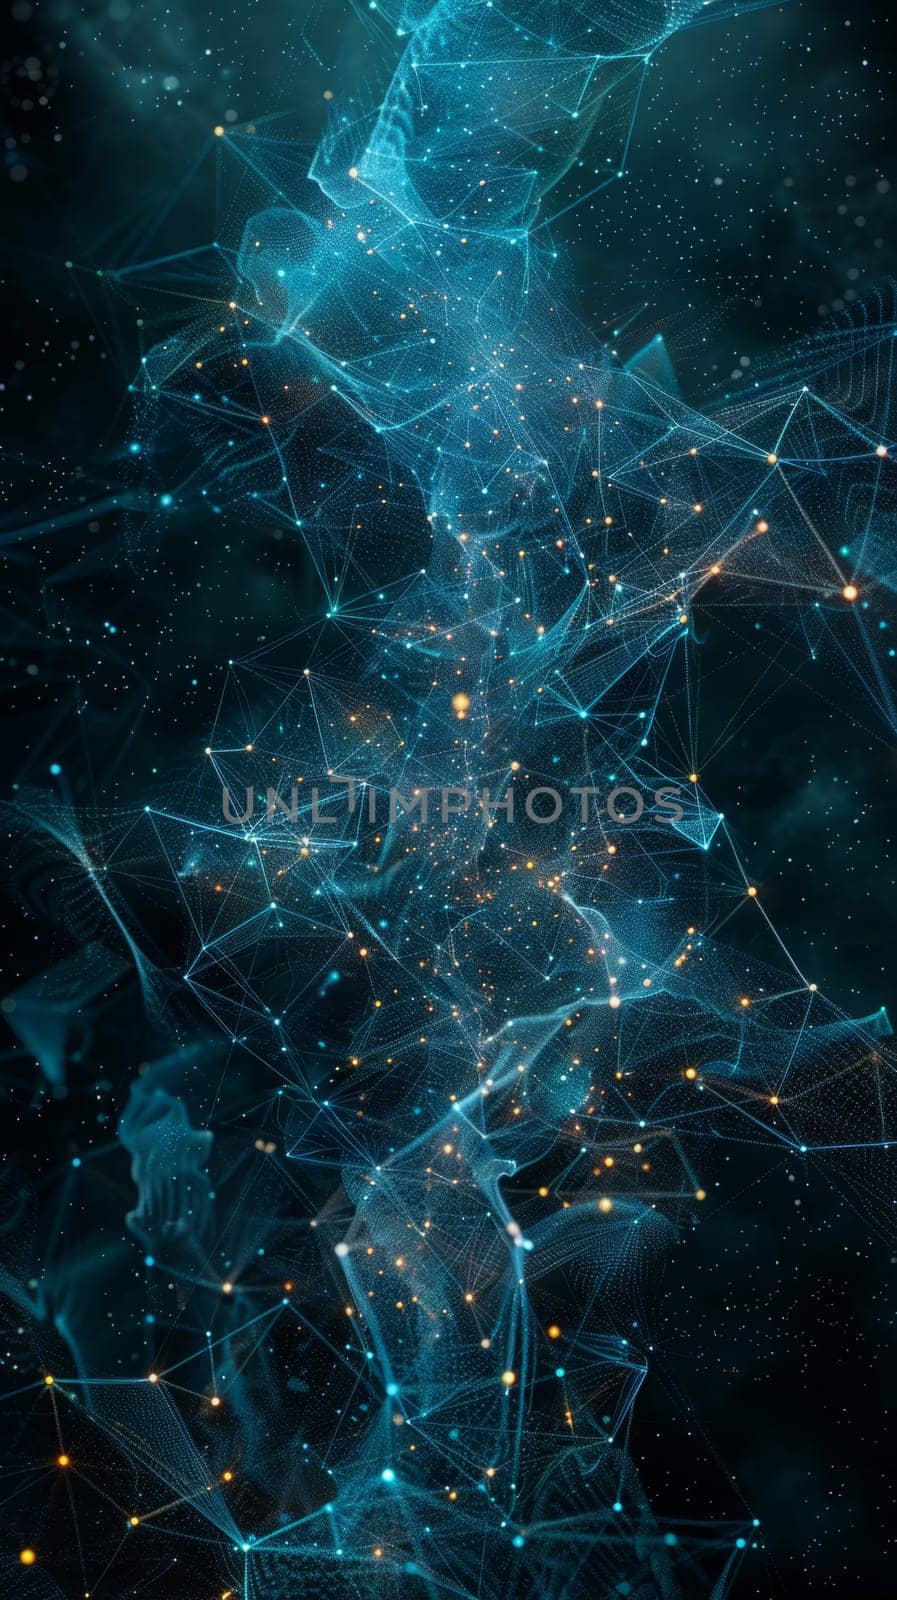 Blue Abstract Lighting Connection Technology Futuristic Background. by iliris